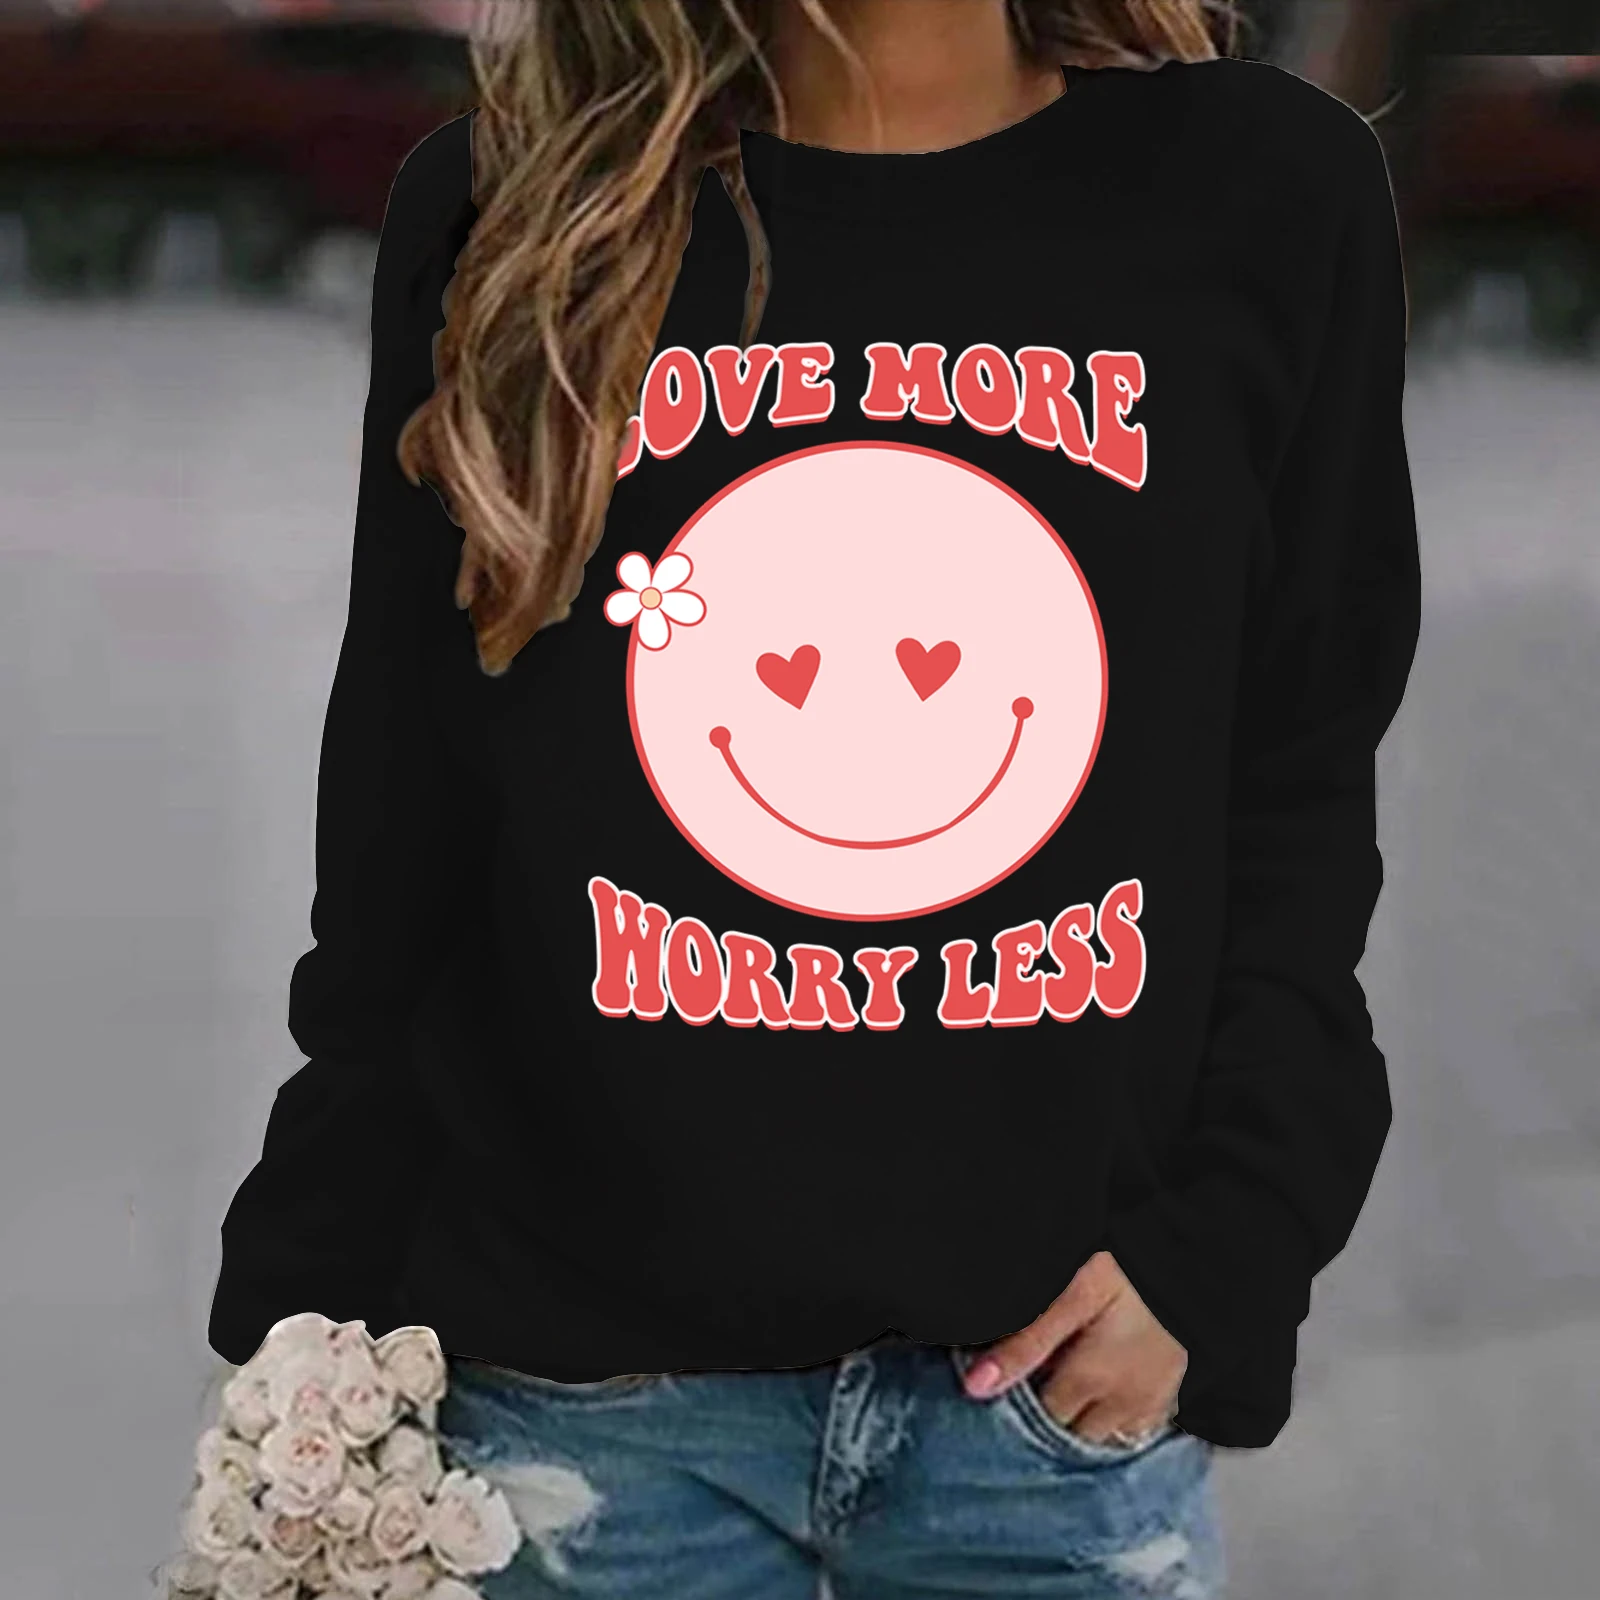 

Ins Hoodie Love More Worry Less Tracksuit Clothing Women Men Graphics 90s Lovely Streetwear Unisex Sweatshirt Smiling Hoodied